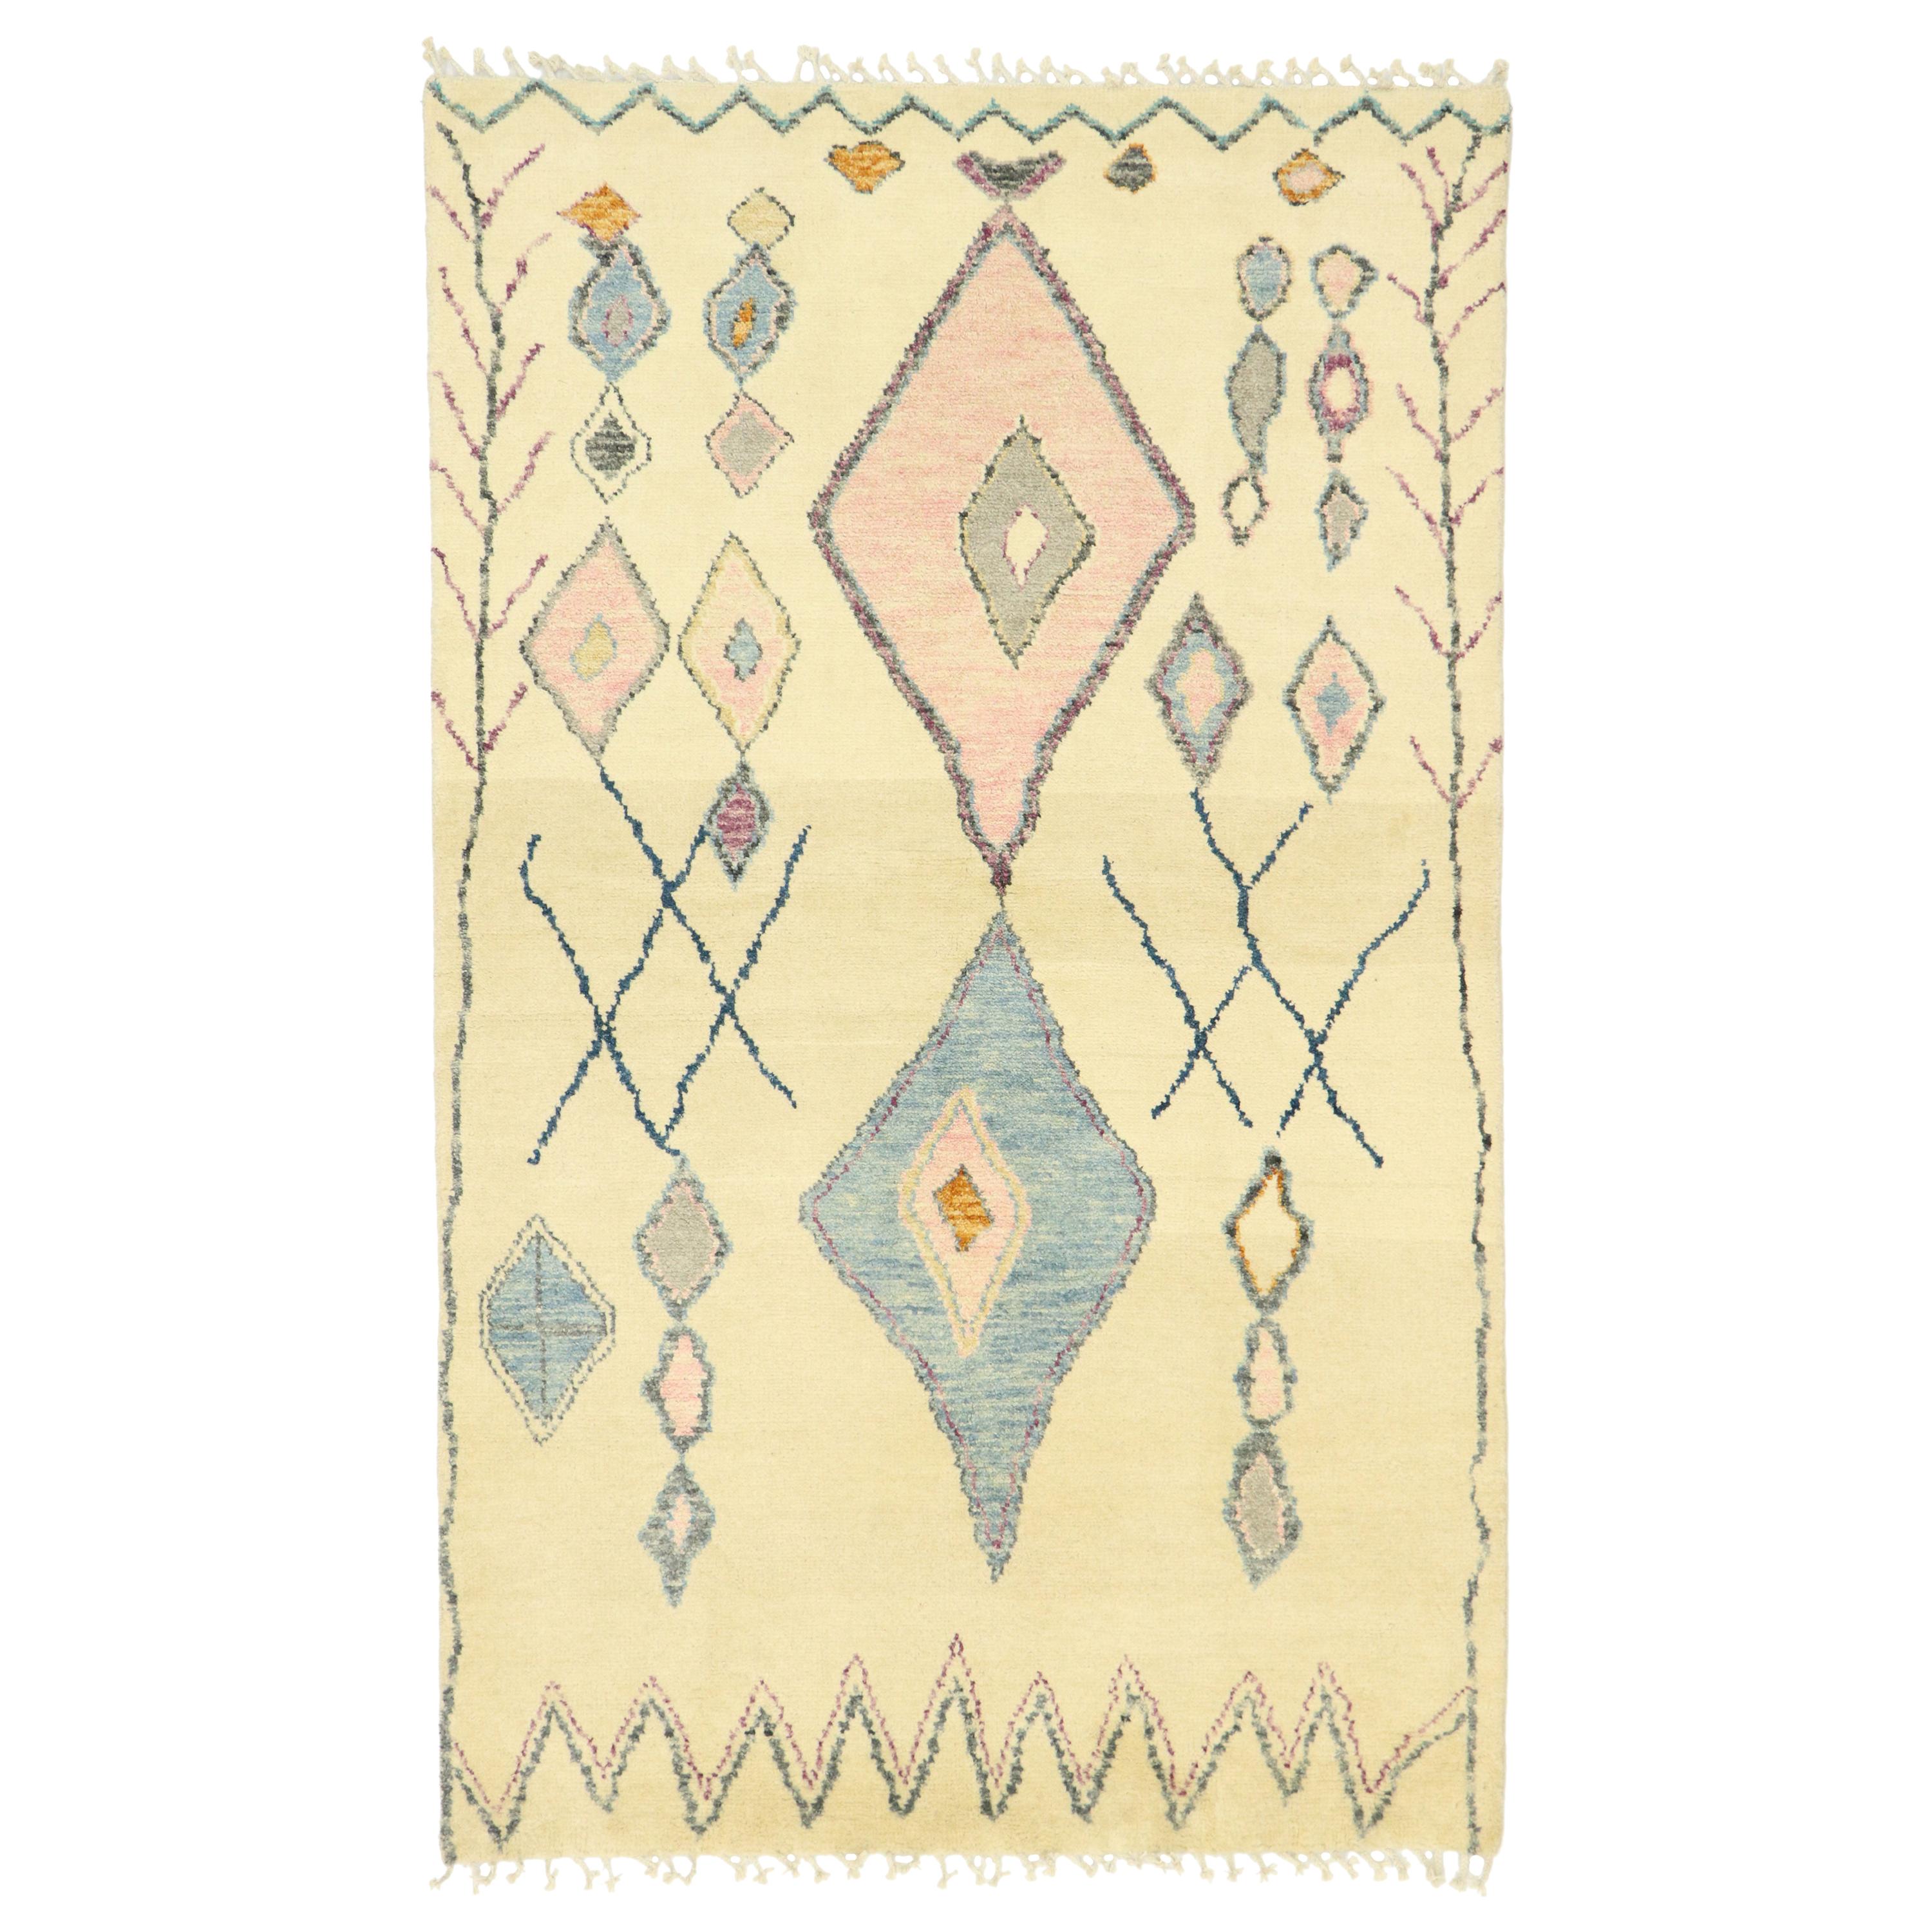 New Contemporary Moroccan Rug with Boho Chic Tribal Style with Cozy Hygge Vibes For Sale